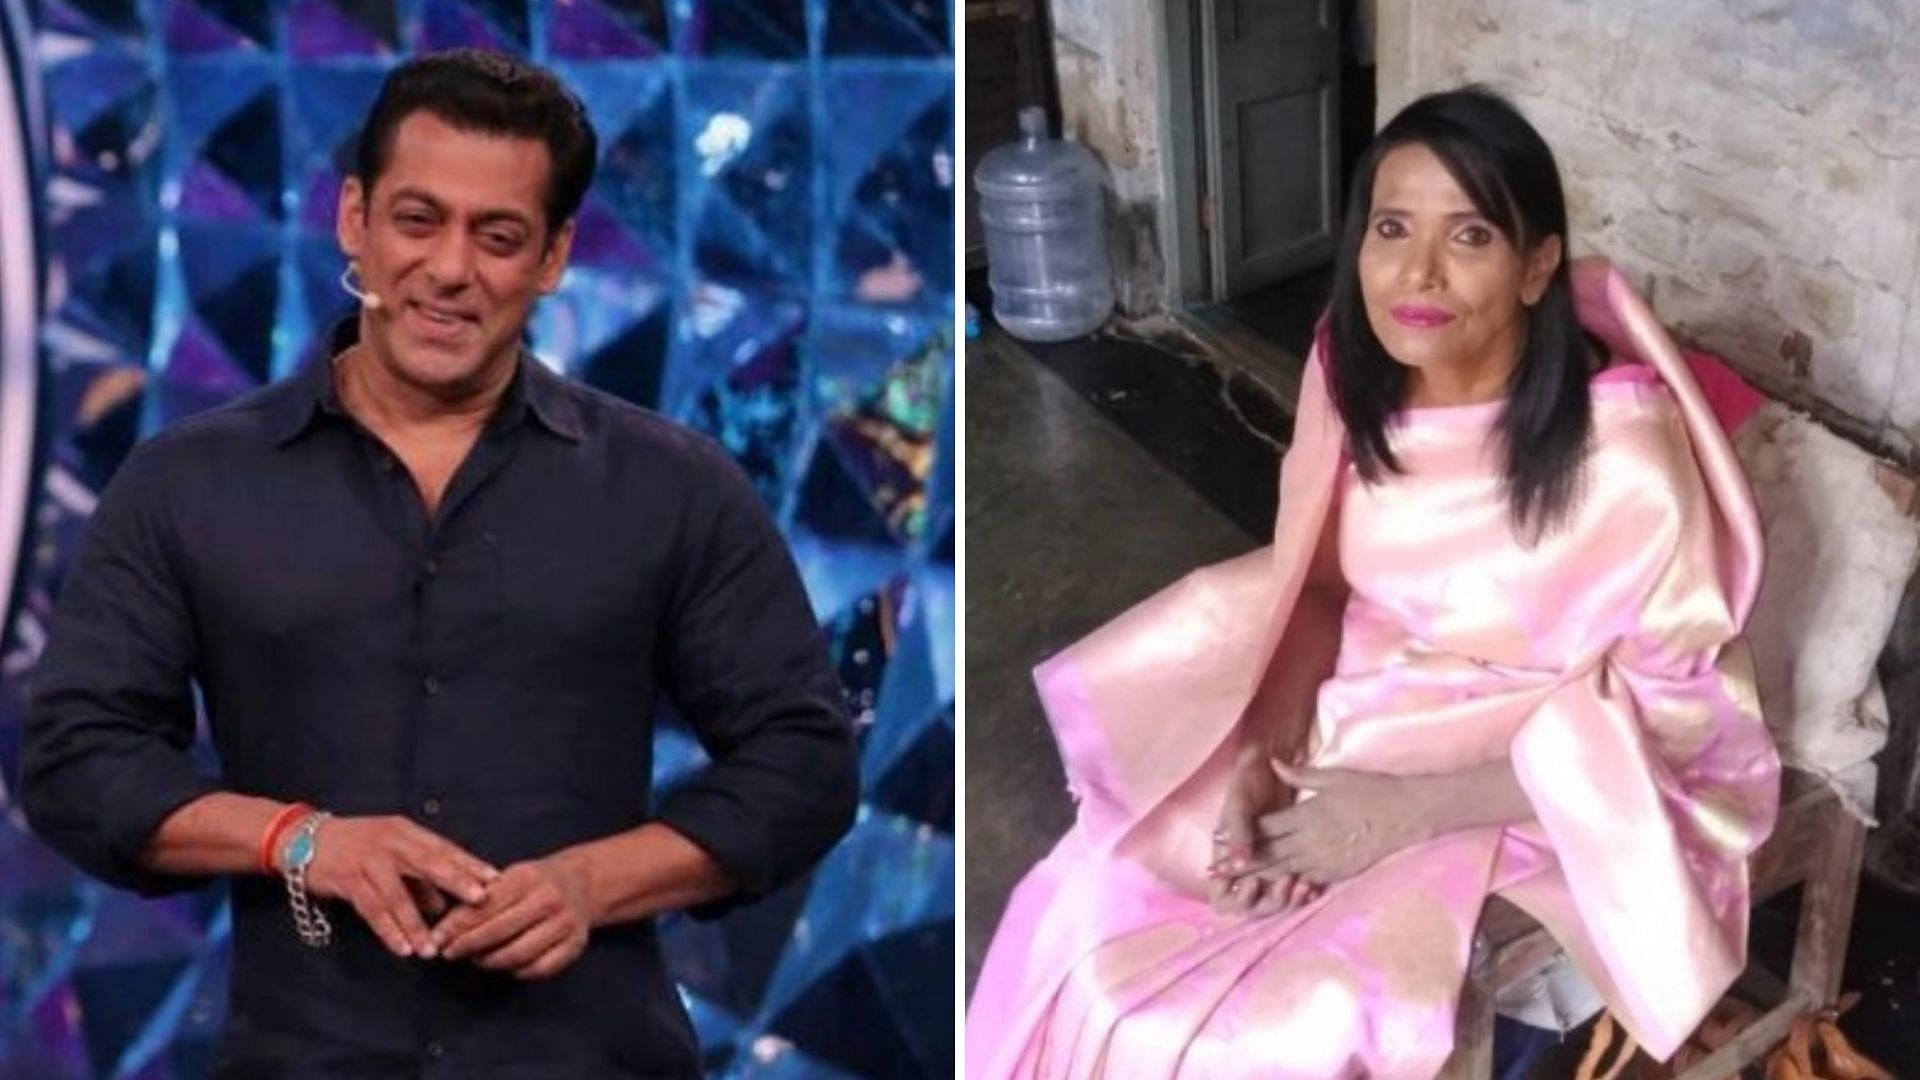 Salman Khan is reported to have gifted a house to singer Ranu Mondal.